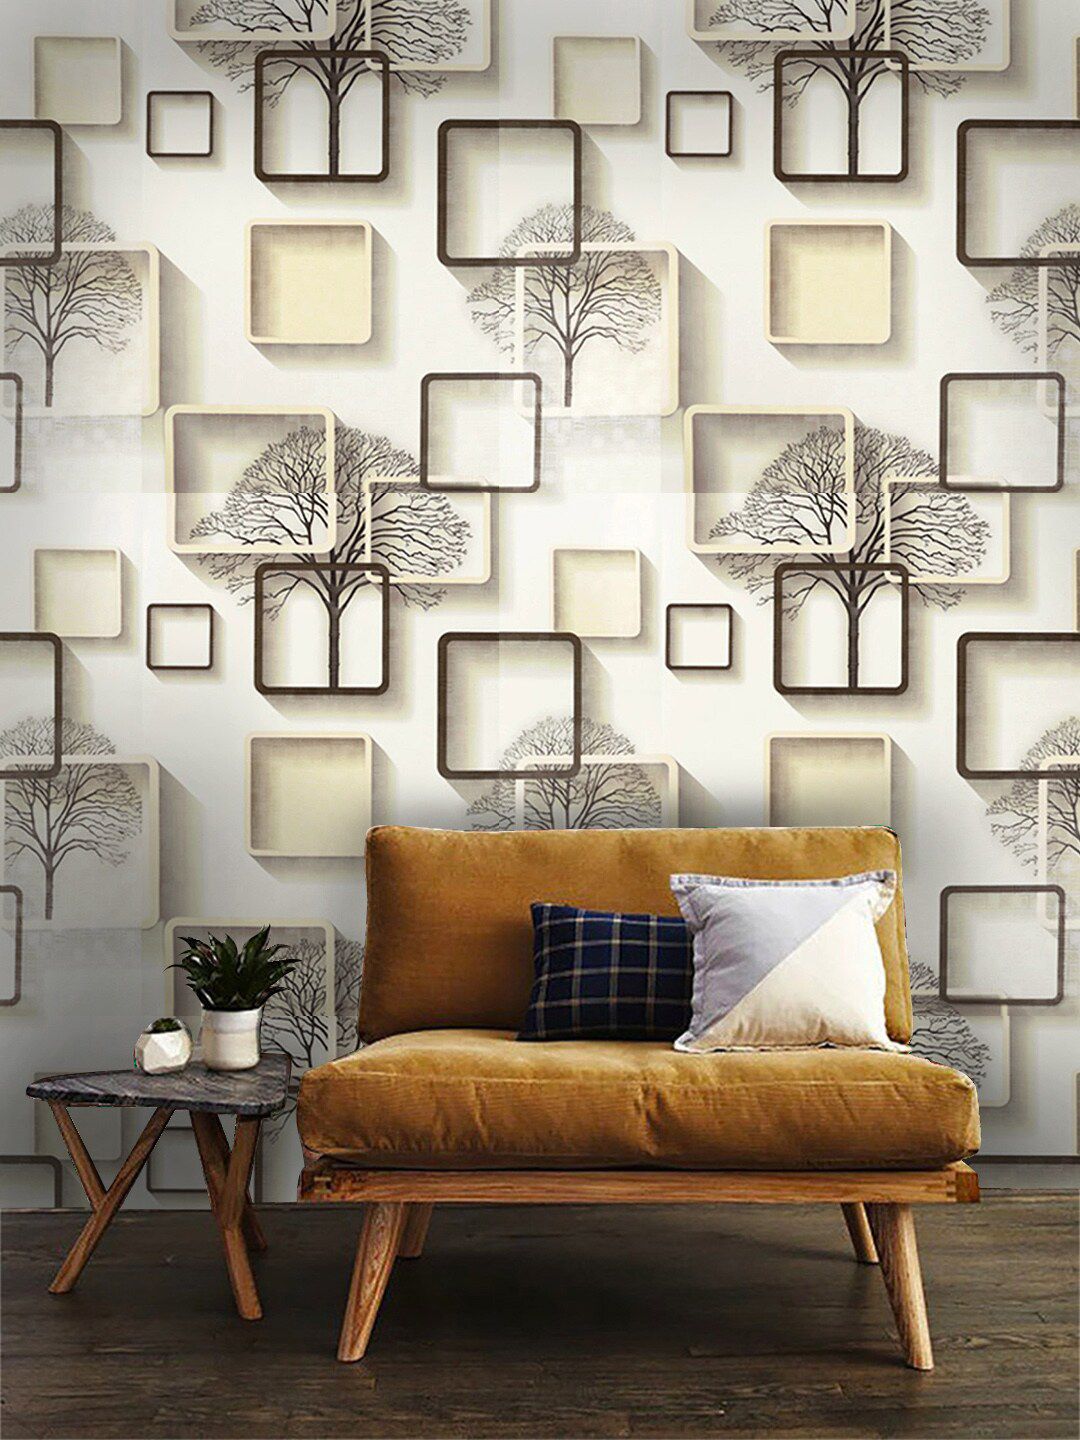 Jaamso Royals White & Brown Square Patterned Self-Adhesive Waterproof Wallpaper Price in India